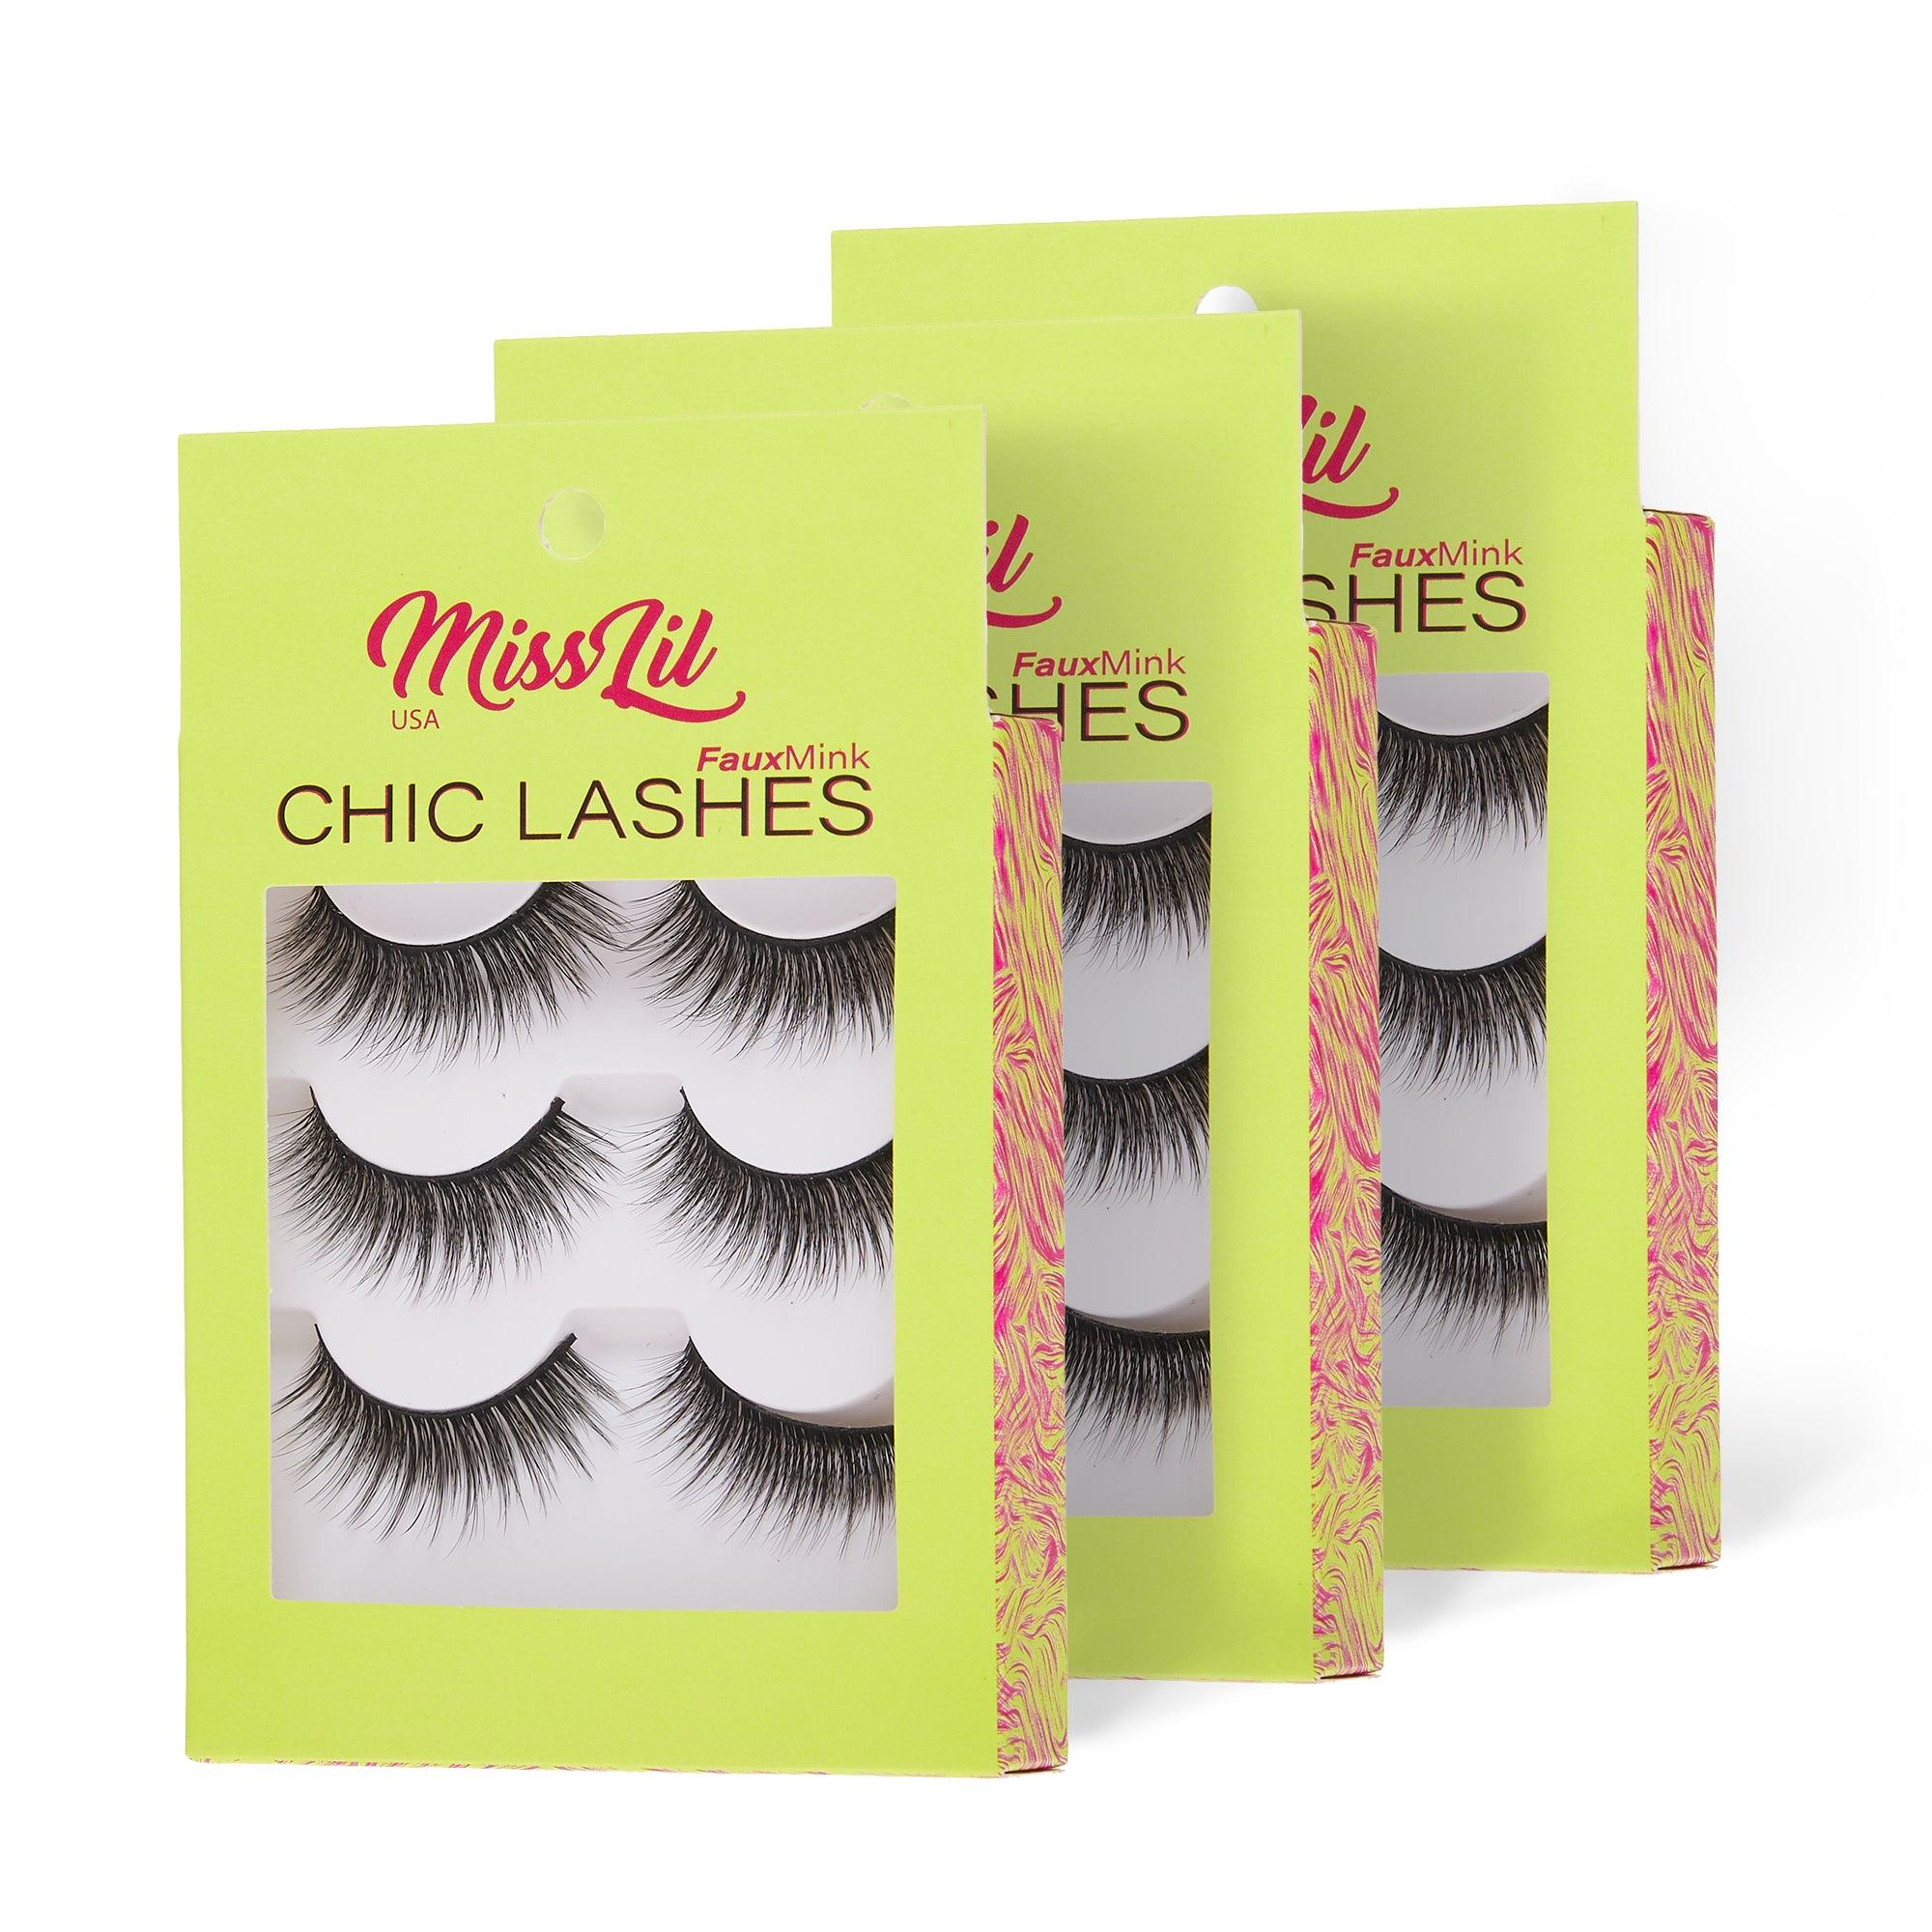 3-Pair Faux Mink Eyelashes - Chic Lashes Collection #31 - Pack of 3 - Miss Lil USA